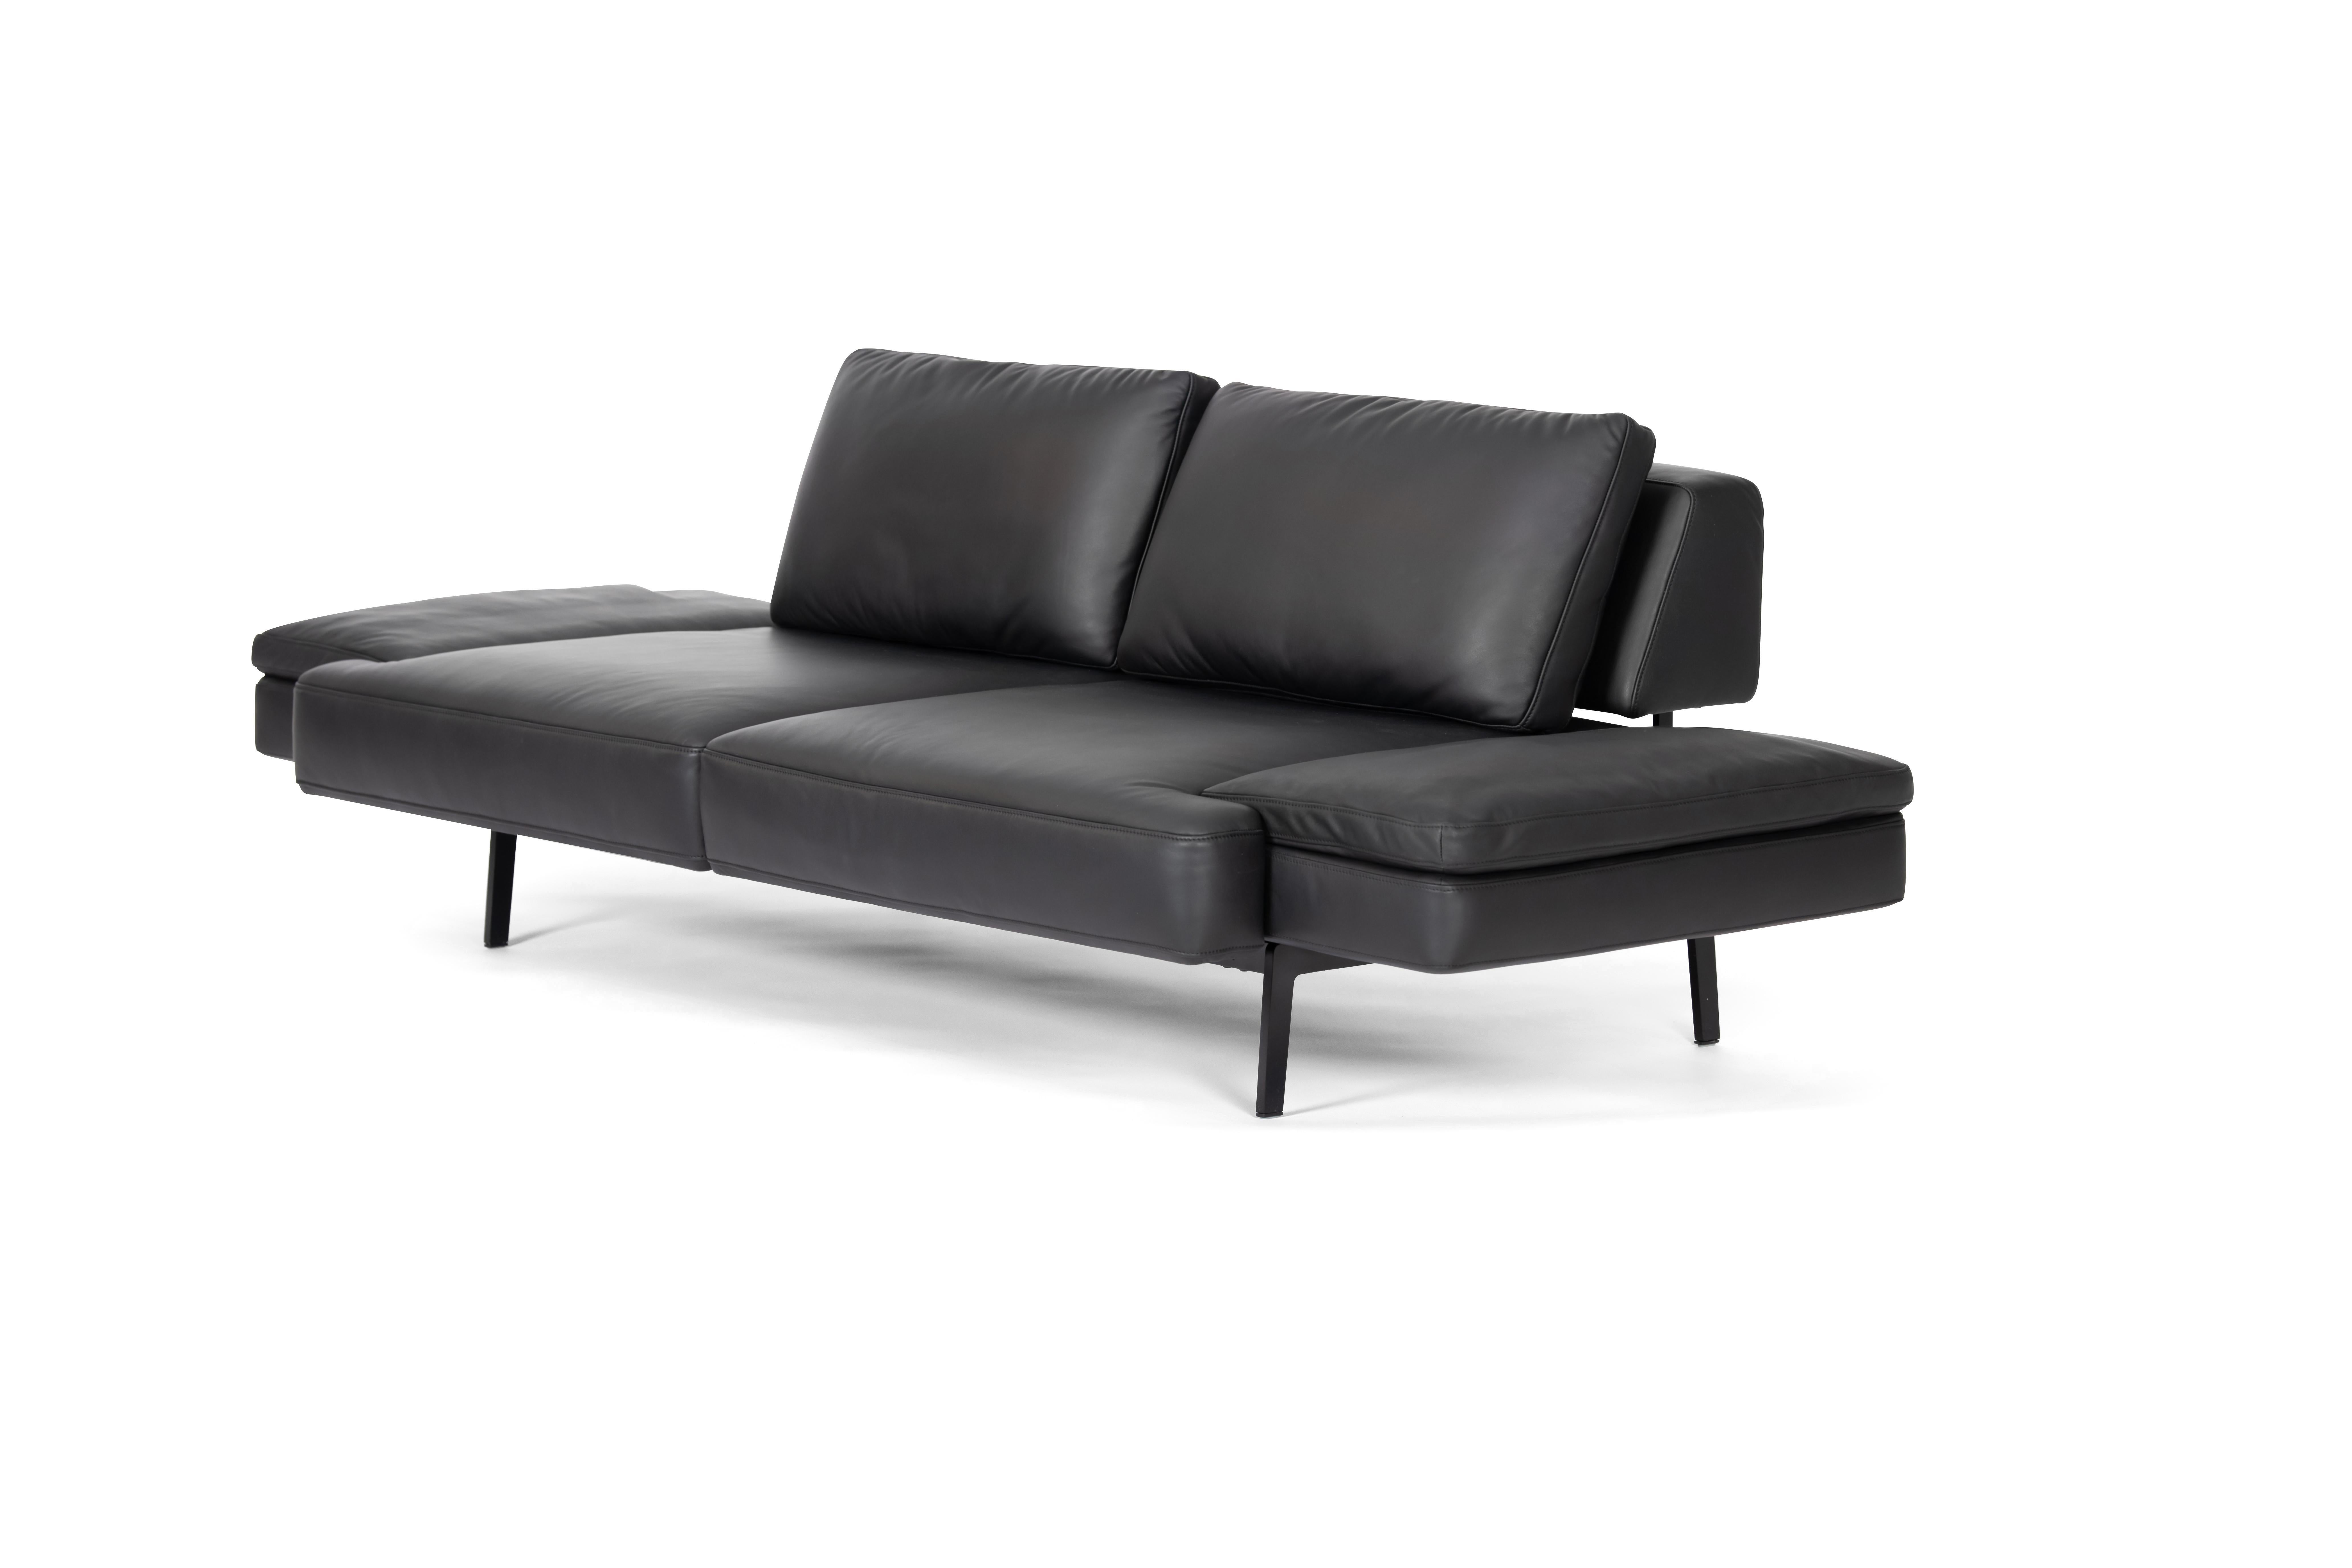 De Sede DS-747/03 Multifunctional Sofa in Black Leather Seat and Back Upholstery In New Condition For Sale In Brooklyn, NY